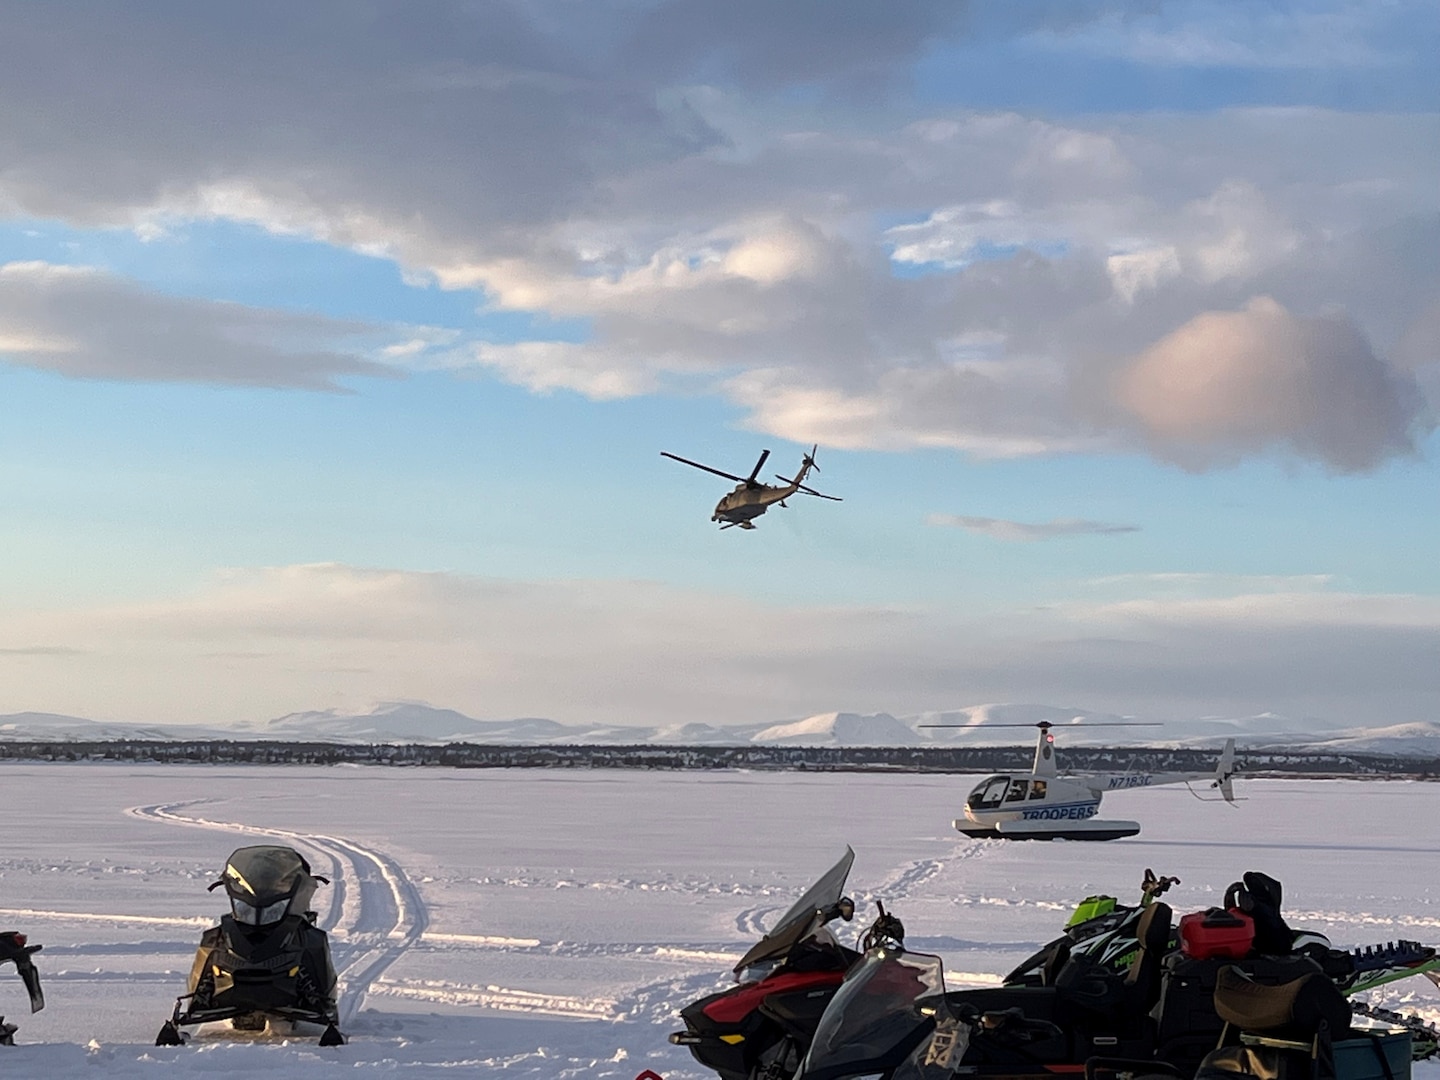 A 210th Rescue Squadron HH-60G Pave Hawk helicopter conducts rescue operations March 5, 2022, at the Lake Iliamna crash site of a Cessna 206. On the ground are an Alaska State Trooper R-44 helicopter and good Samaritans’ snowmachines in the foreground.